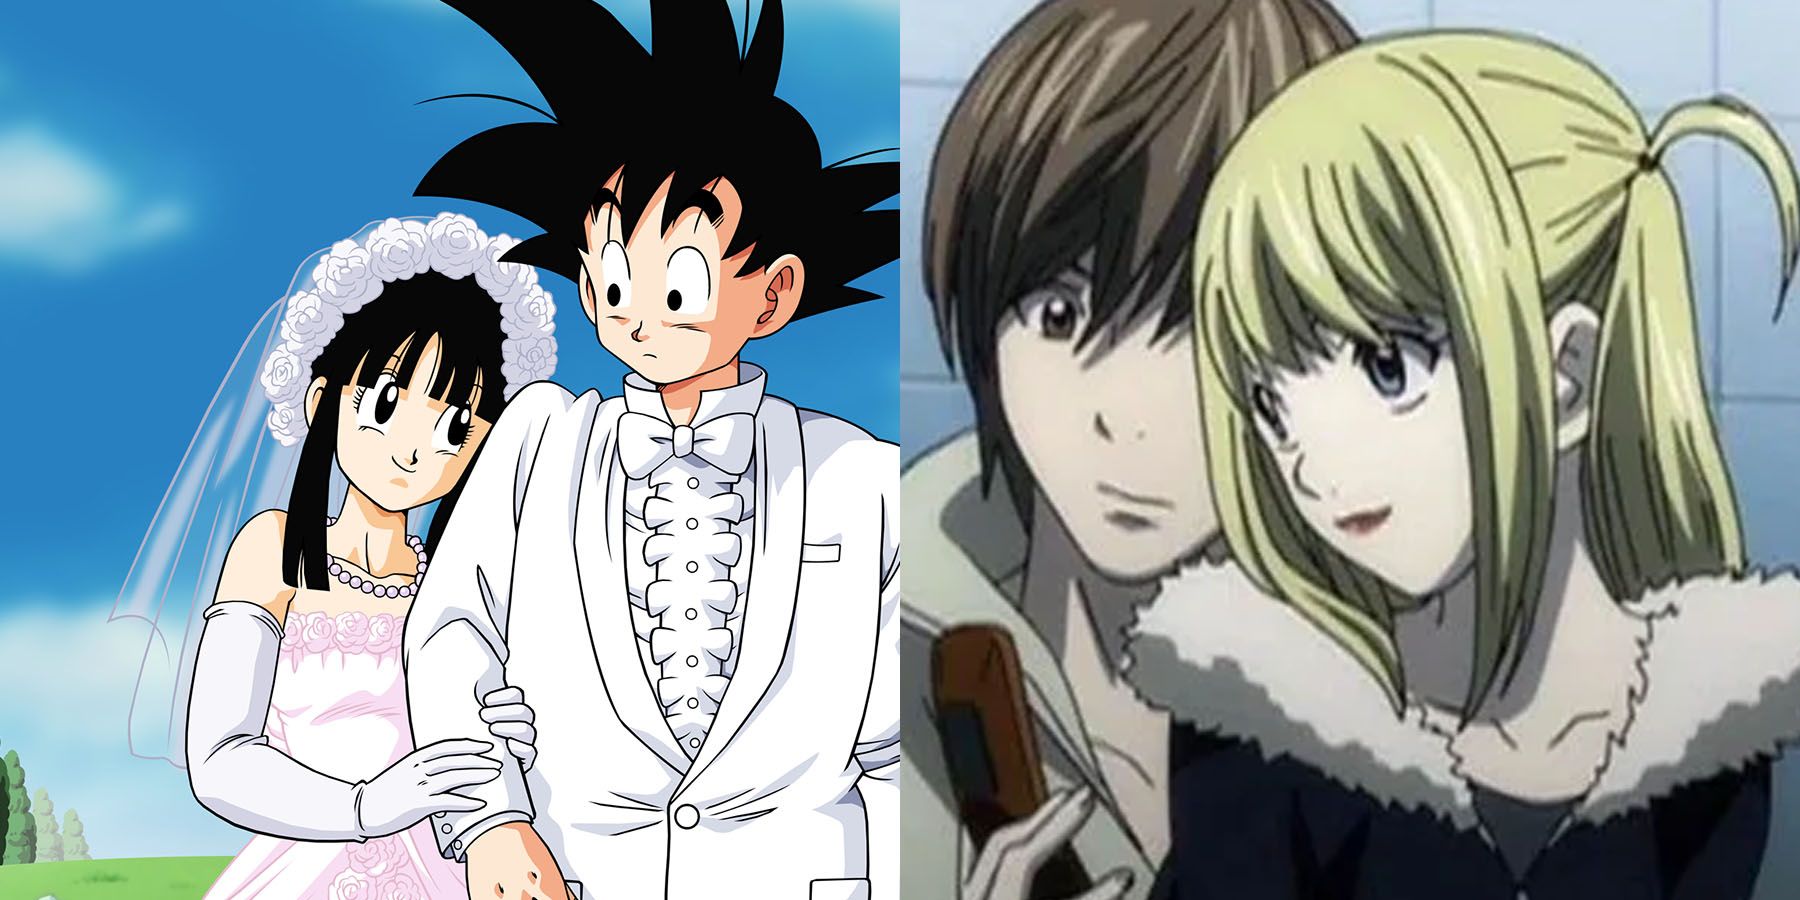 Goku and Chichi from Dragon Ball and Light and Misa from Death Note